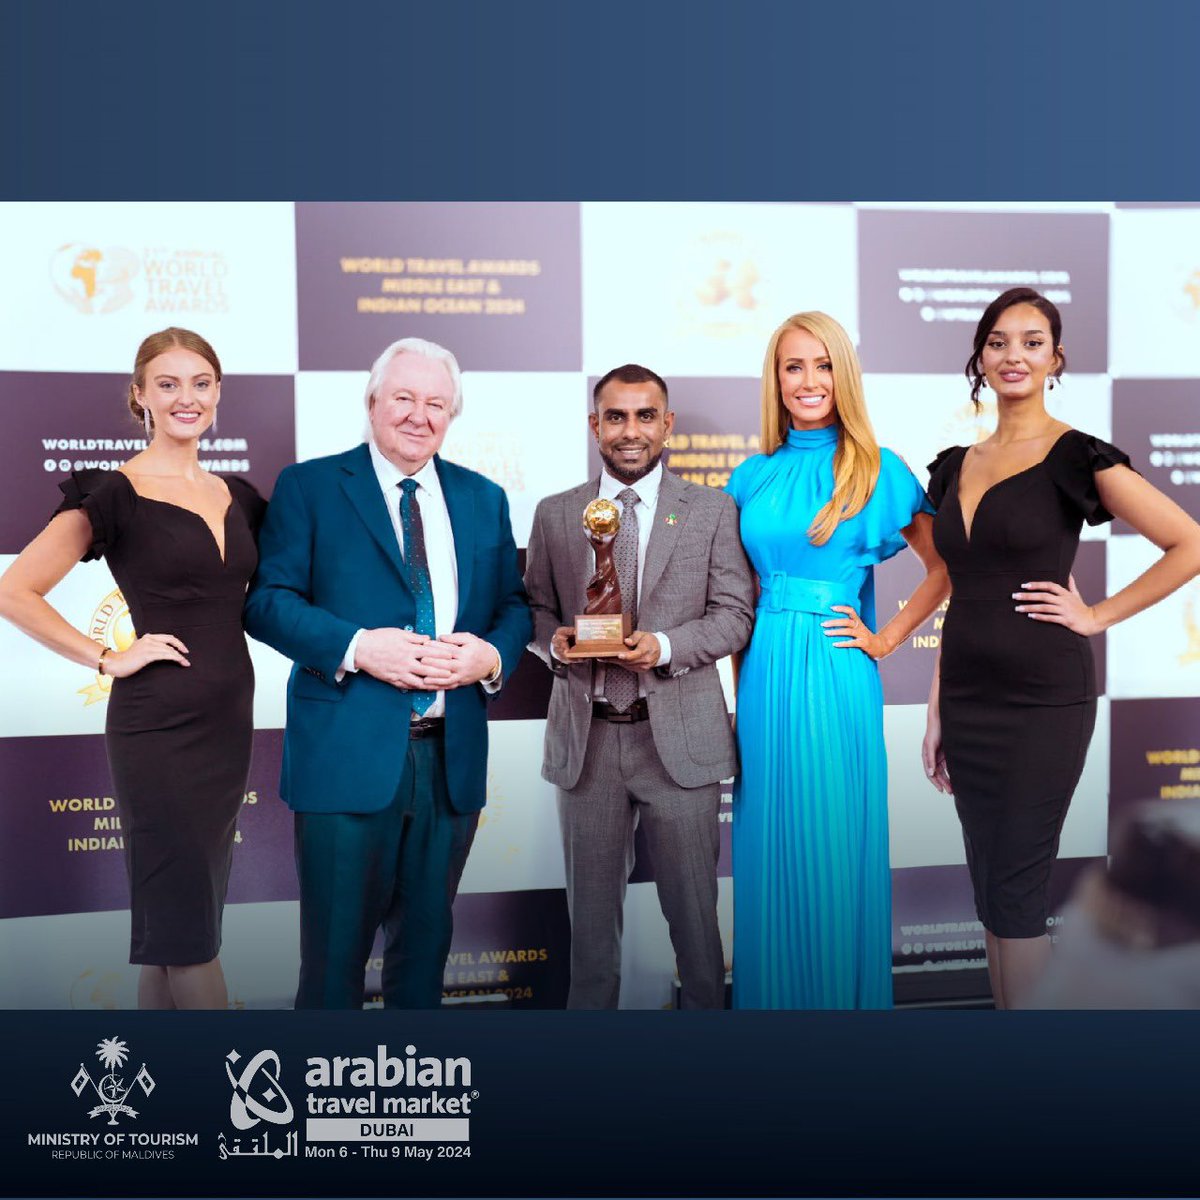 Maldives shines at the World Travel Awards! Named Indian Ocean's Leading Green Destination, Honeymoon Destination, Dive Destination, and overall Leading Destination!
Congratulations to all! #ATM2024 #WTA2024